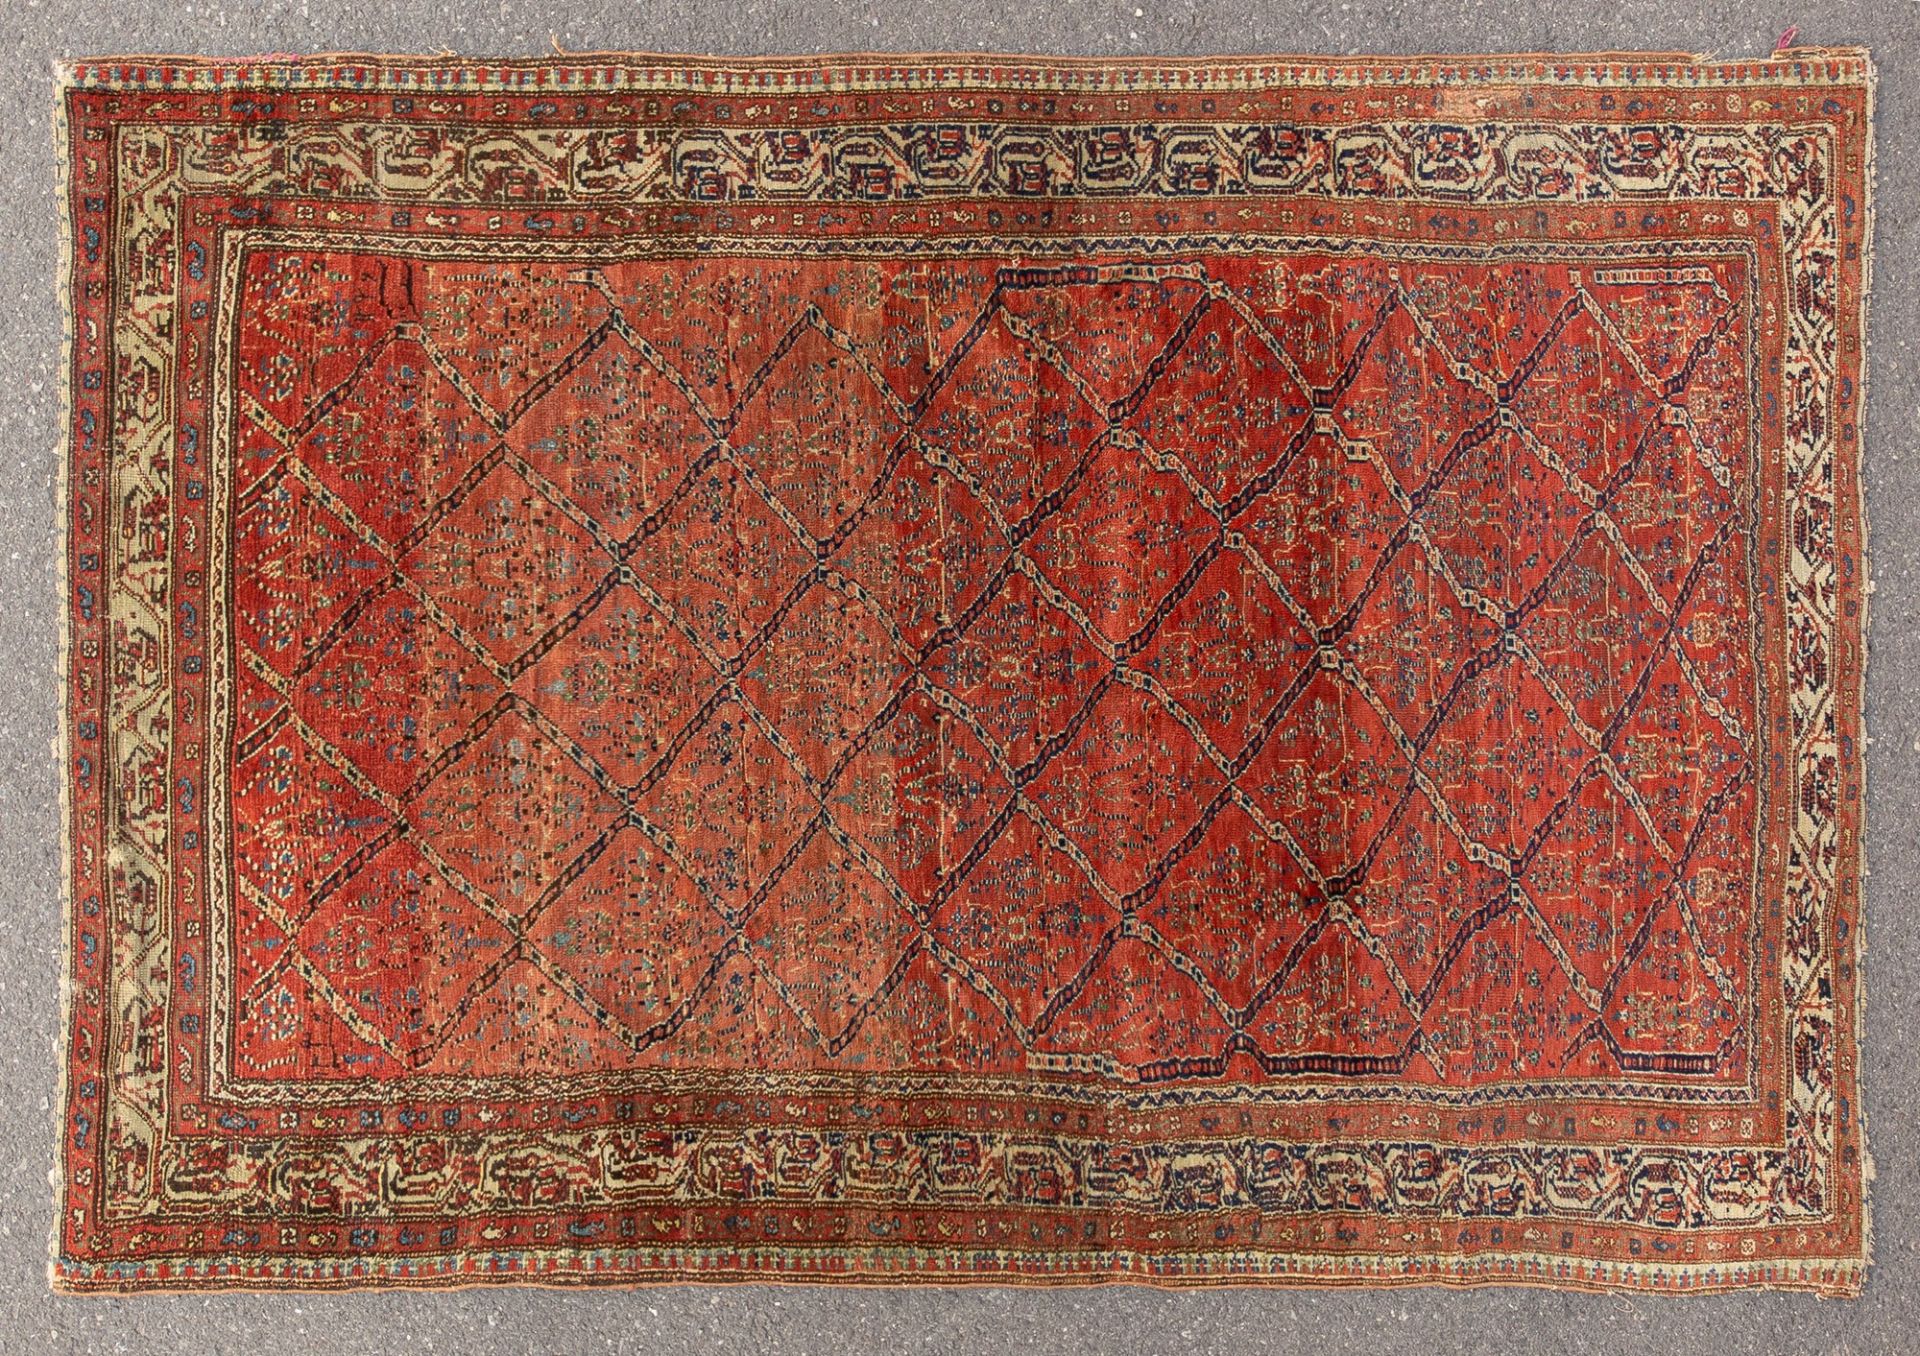 Very fine Persian Ferahan carpet from the first half of the 20th century